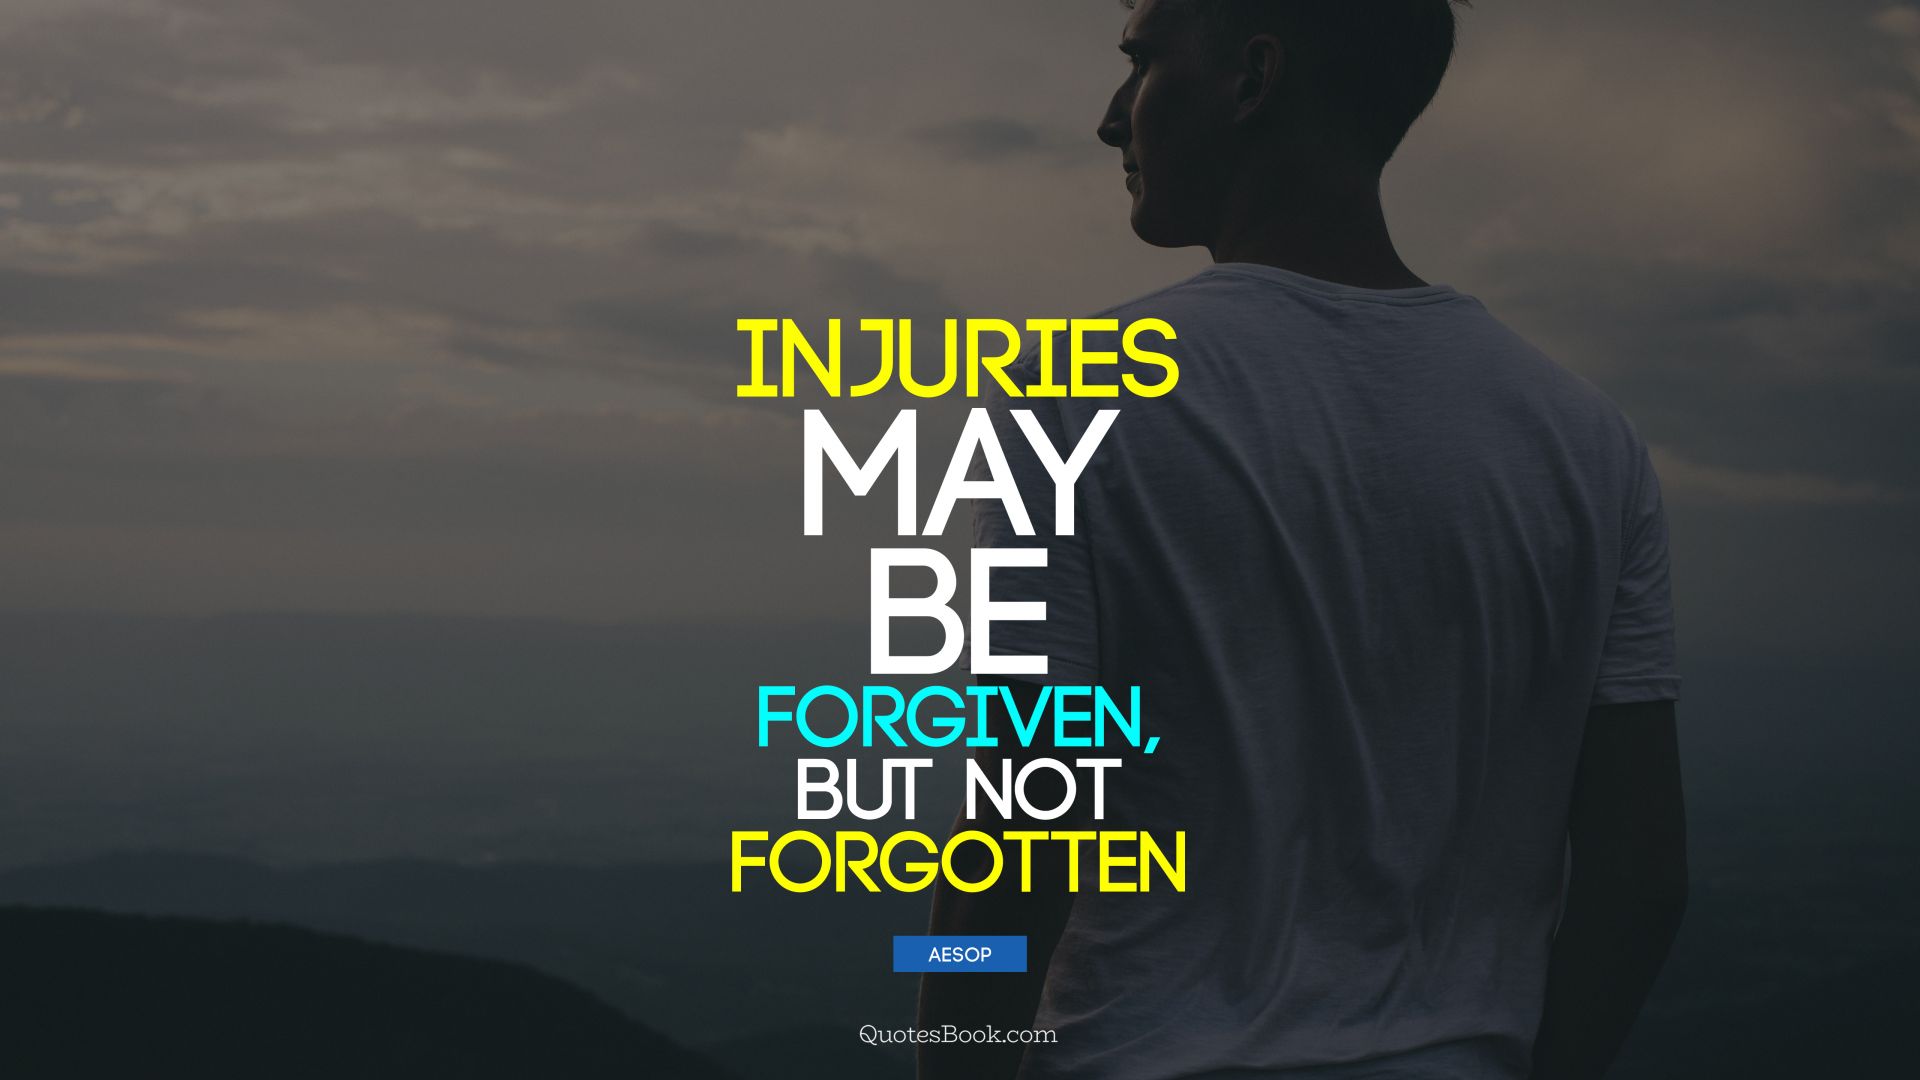 Injuries may be forgiven, but not forgotten. - Quote by Aesop